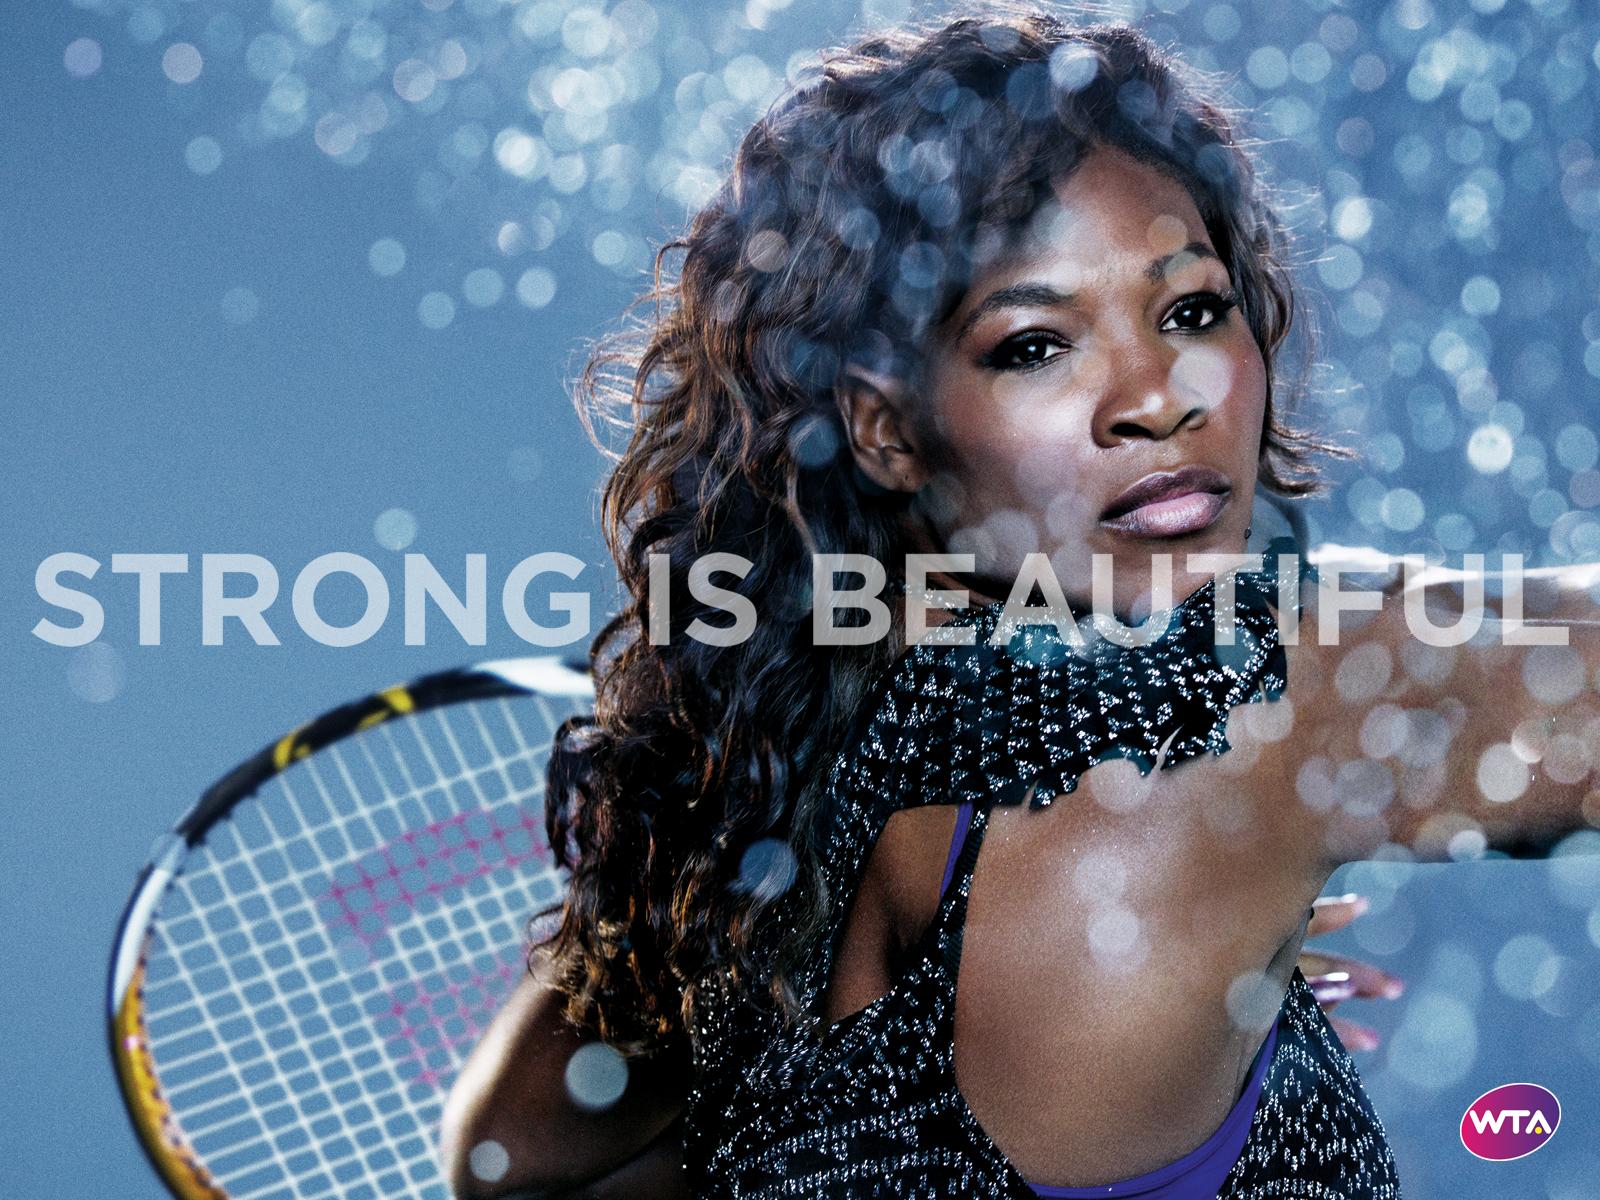 Serena Williams in Strong Is Beautiful - WTA Wallpaper 30743699